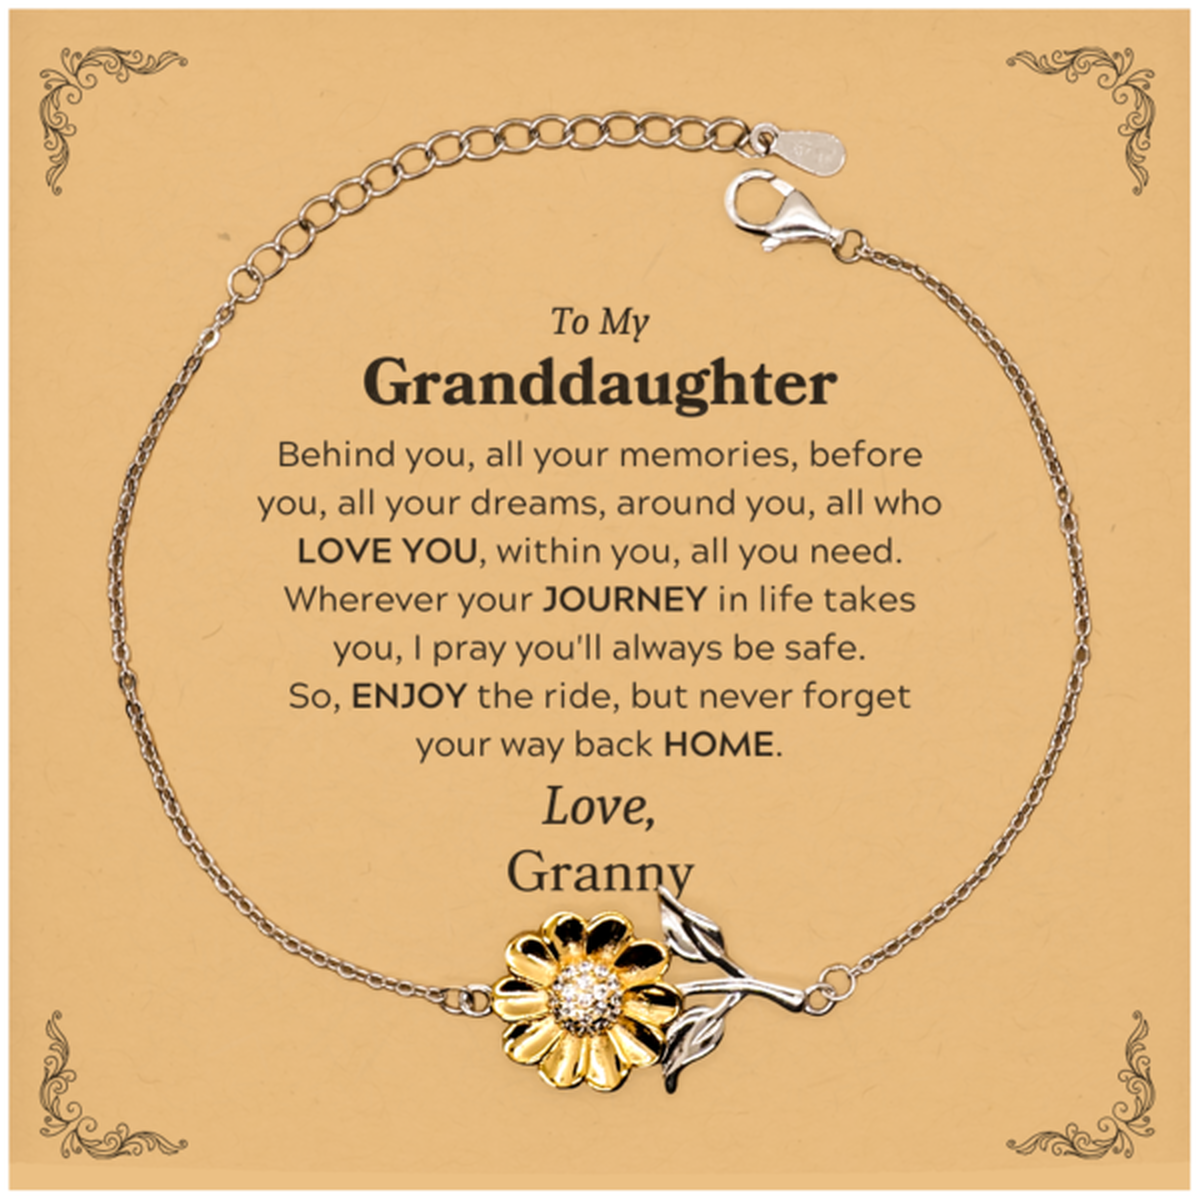 To My Granddaughter Graduation Gifts from Granny, Granddaughter Sunflower Bracelet Christmas Birthday Gifts for Granddaughter Behind you, all your memories, before you, all your dreams. Love, Granny